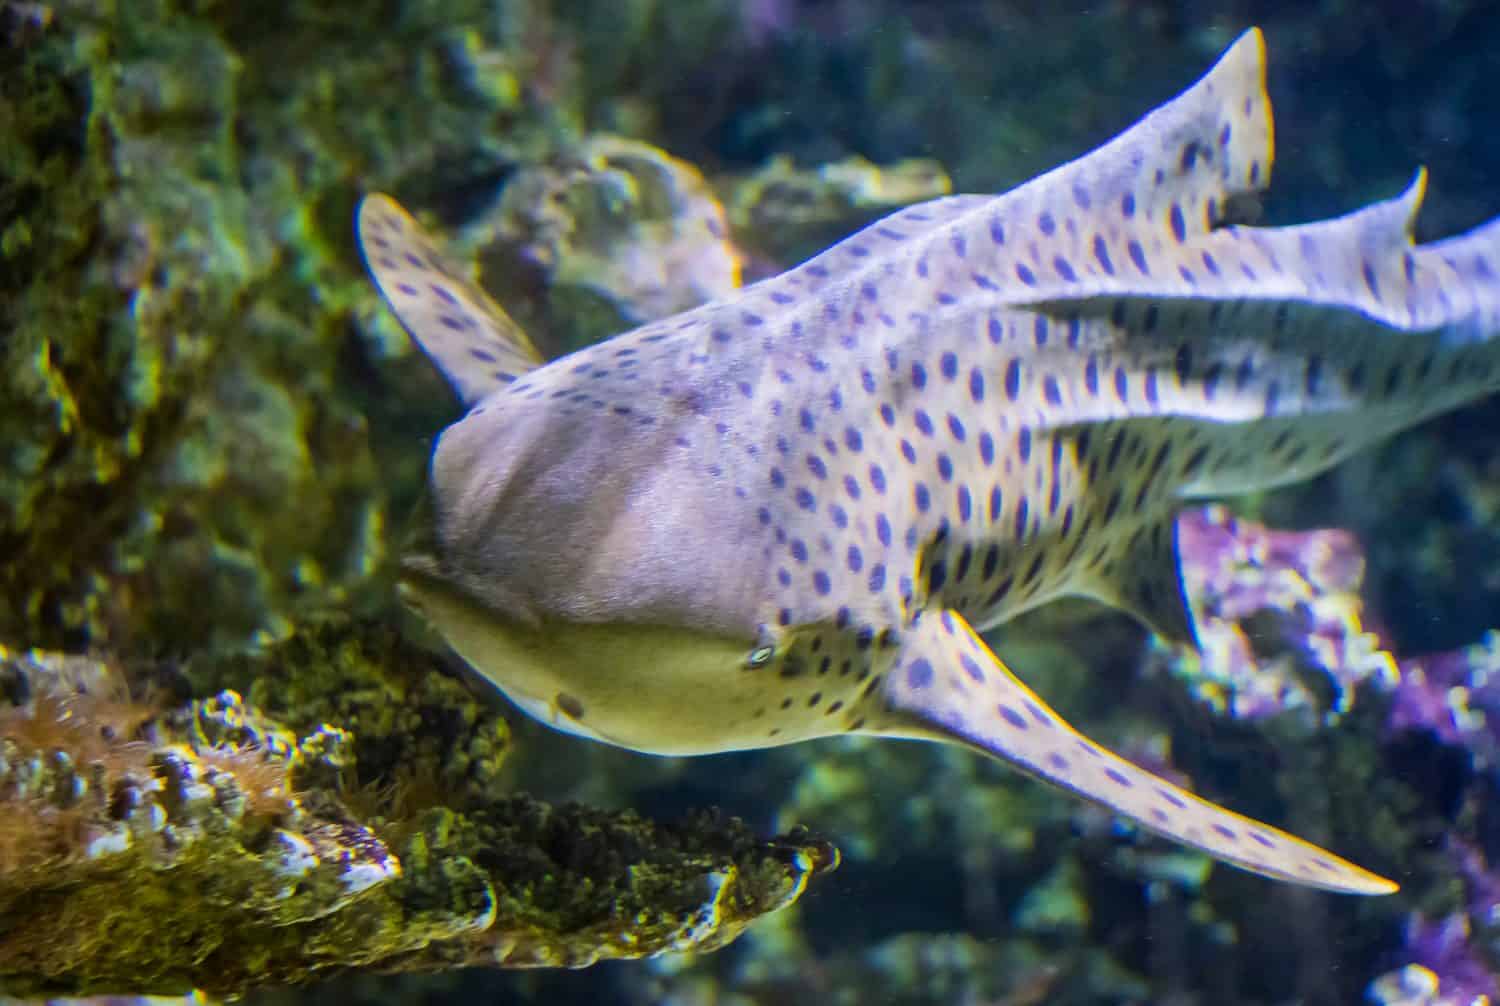 Zebra shark swims at a coral reef in the Indian Ocean. The shark has light brown body with dark stripes. The eyes are small and placed on the sides of the head.